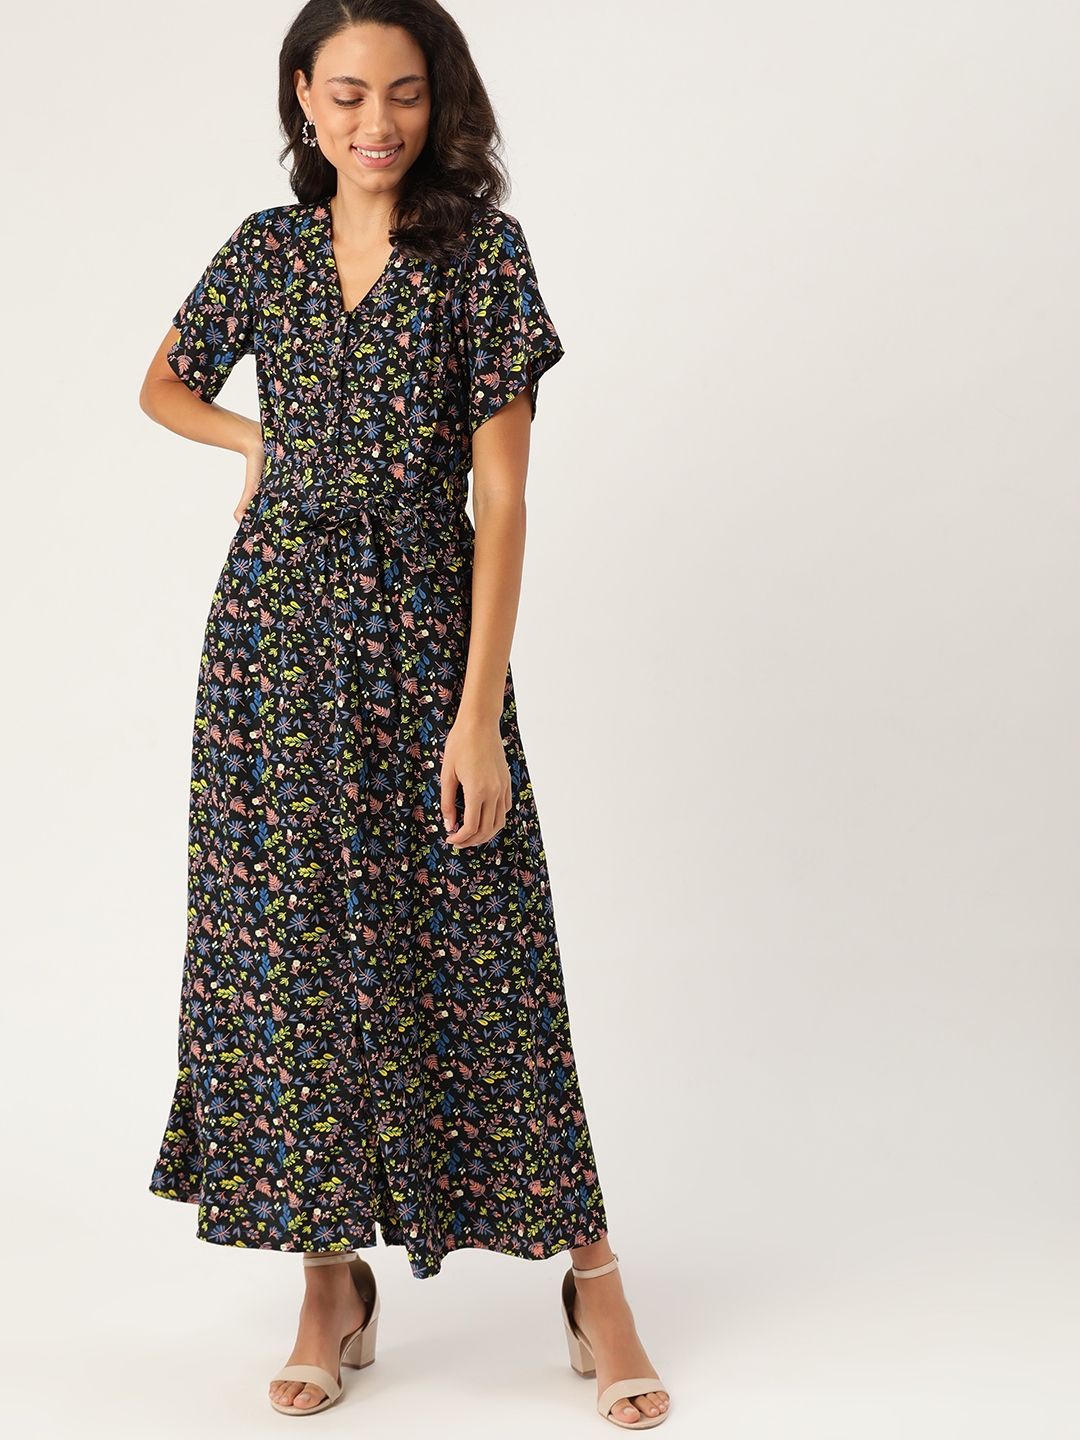 Buy Dressberry Women Blue And Pink Floral Print Maxi Dress With Belt Dresses For Women 11680720 